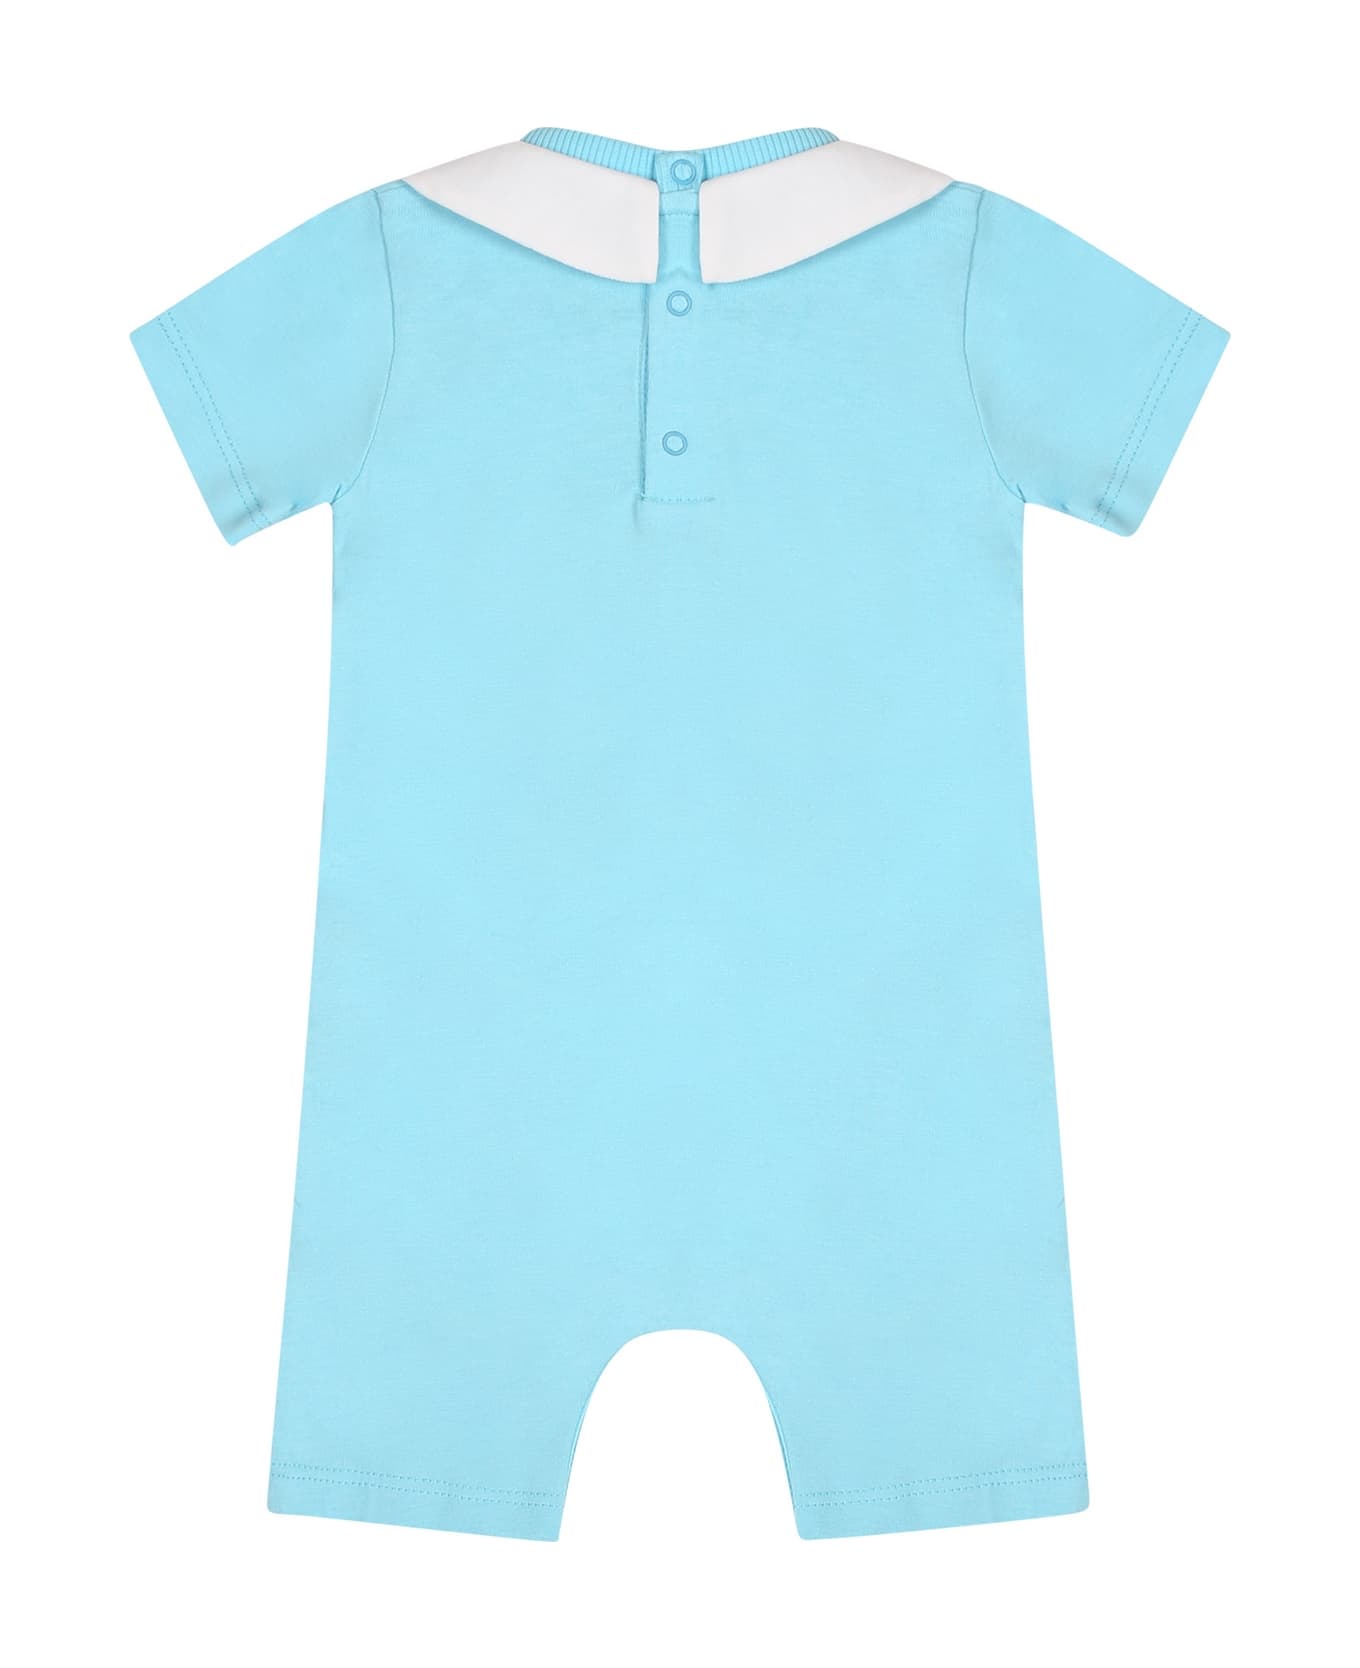 Moschino Light Blue Set For Baby Boy With Teddy Bear And Logo - Light Blue